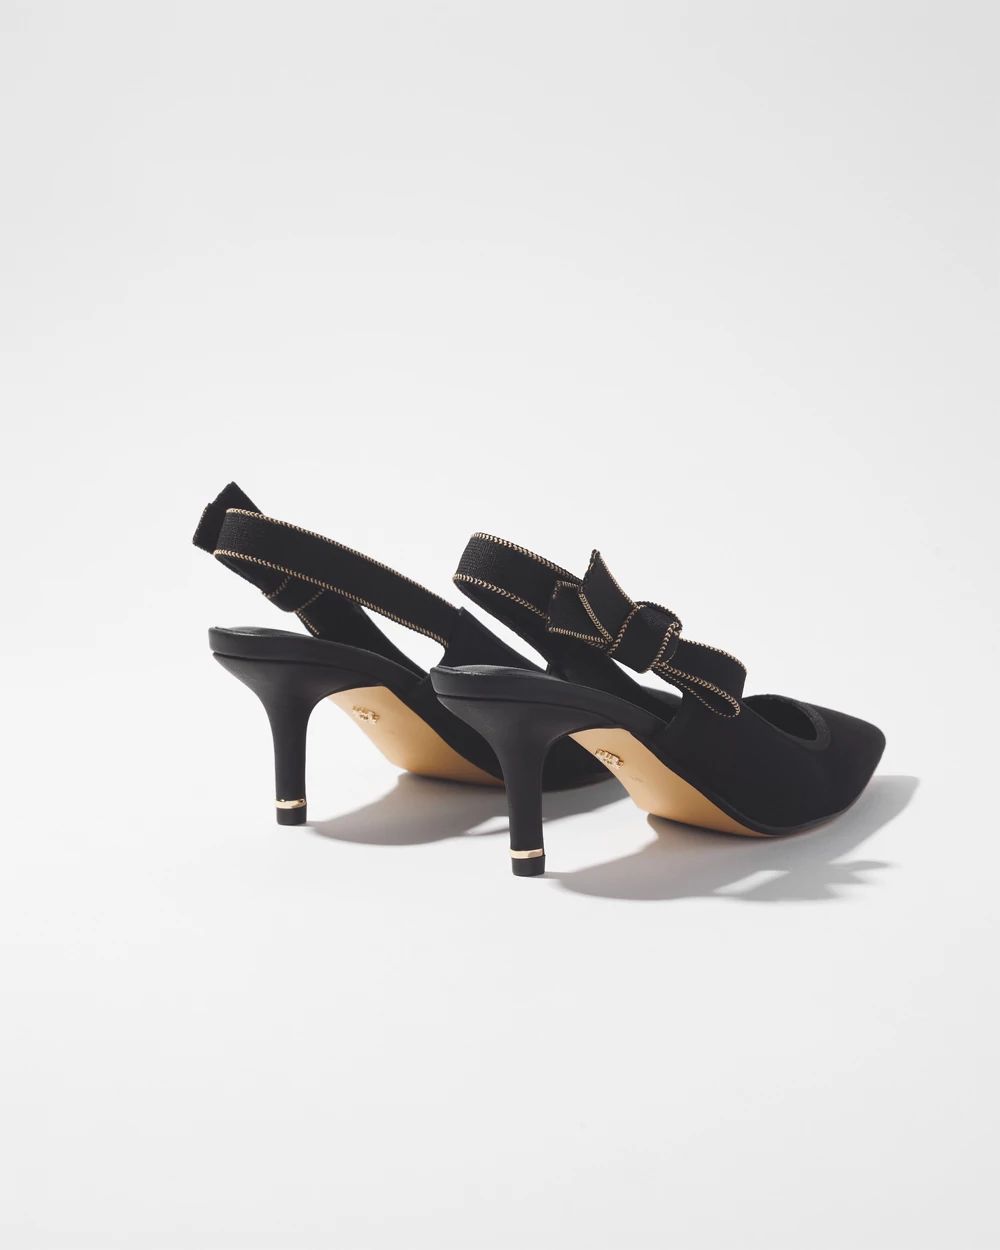 Black Bow Slingback Heels click to view larger image.